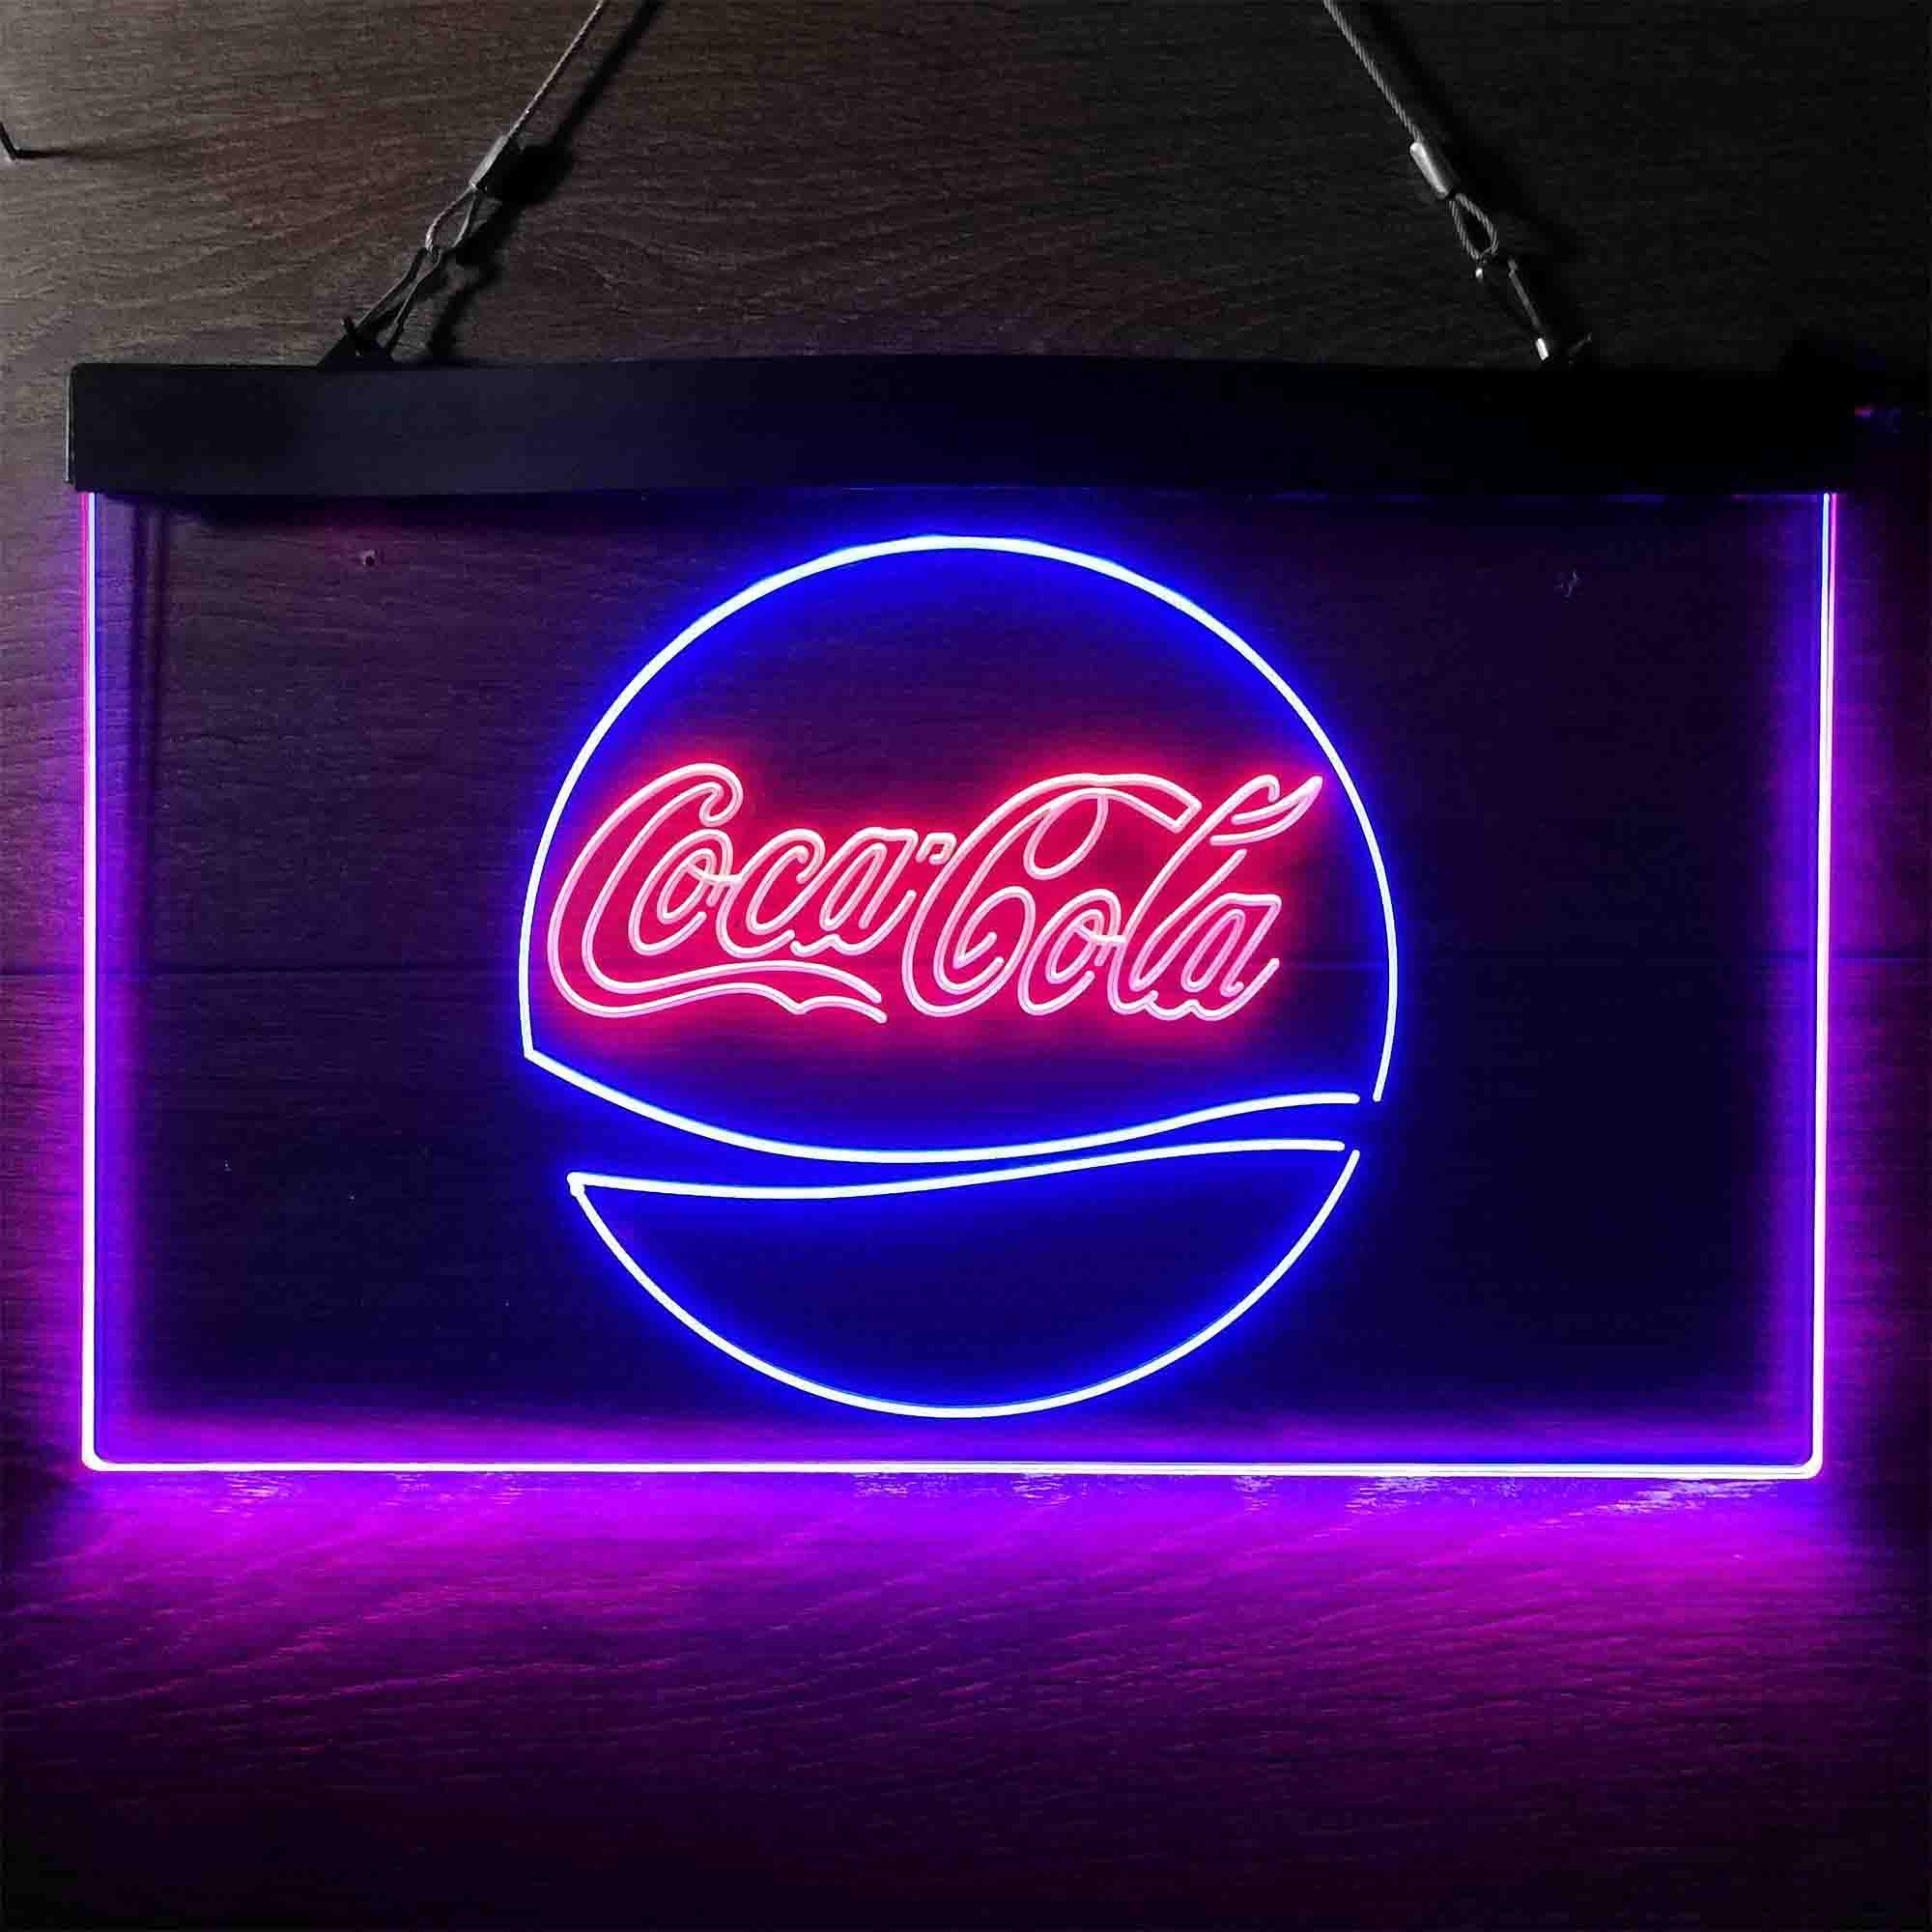 Coca Cola Classic Soft Drink Neon-Like LED Sign